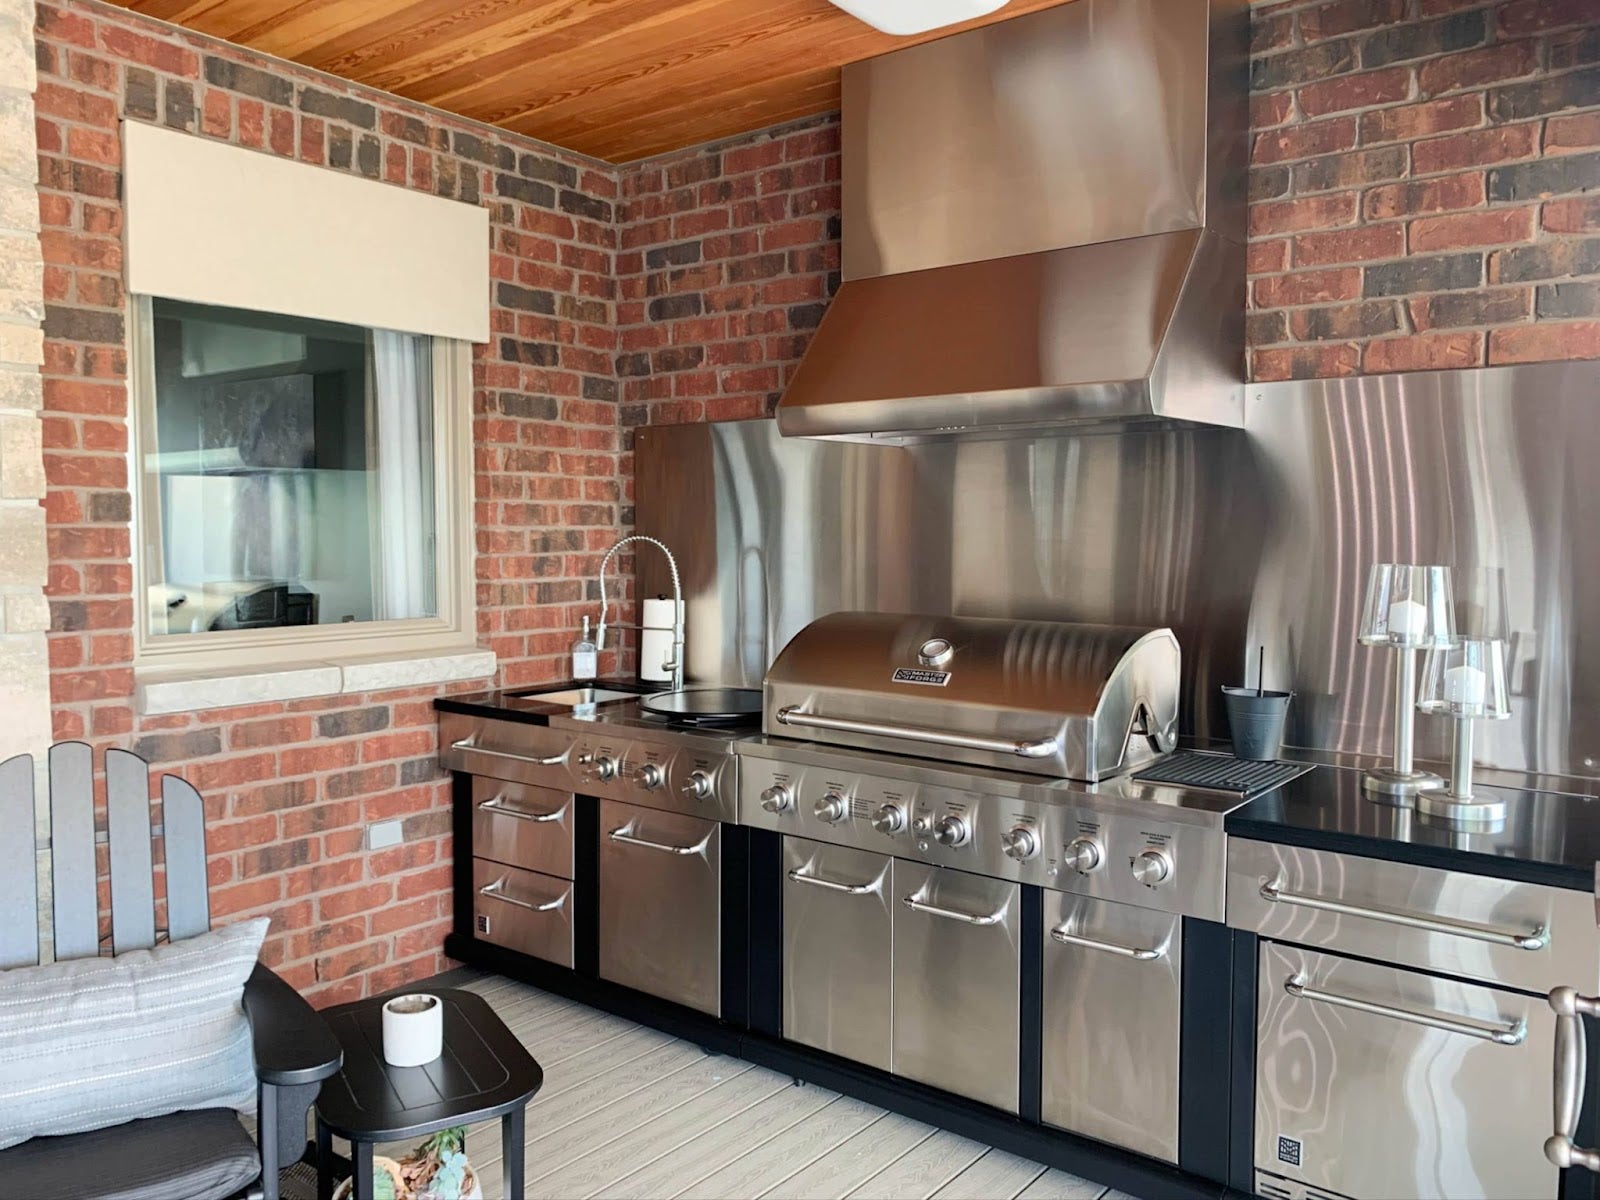 Indoor Grilling Nook: Exposed brick, wood celing, and Proline hood create a cozy grilling space with industrial-rustic vibes. Stainless steel accents and natural light add a touch of elegance. - Proline Range Hoods - prolinerangehoods.com 